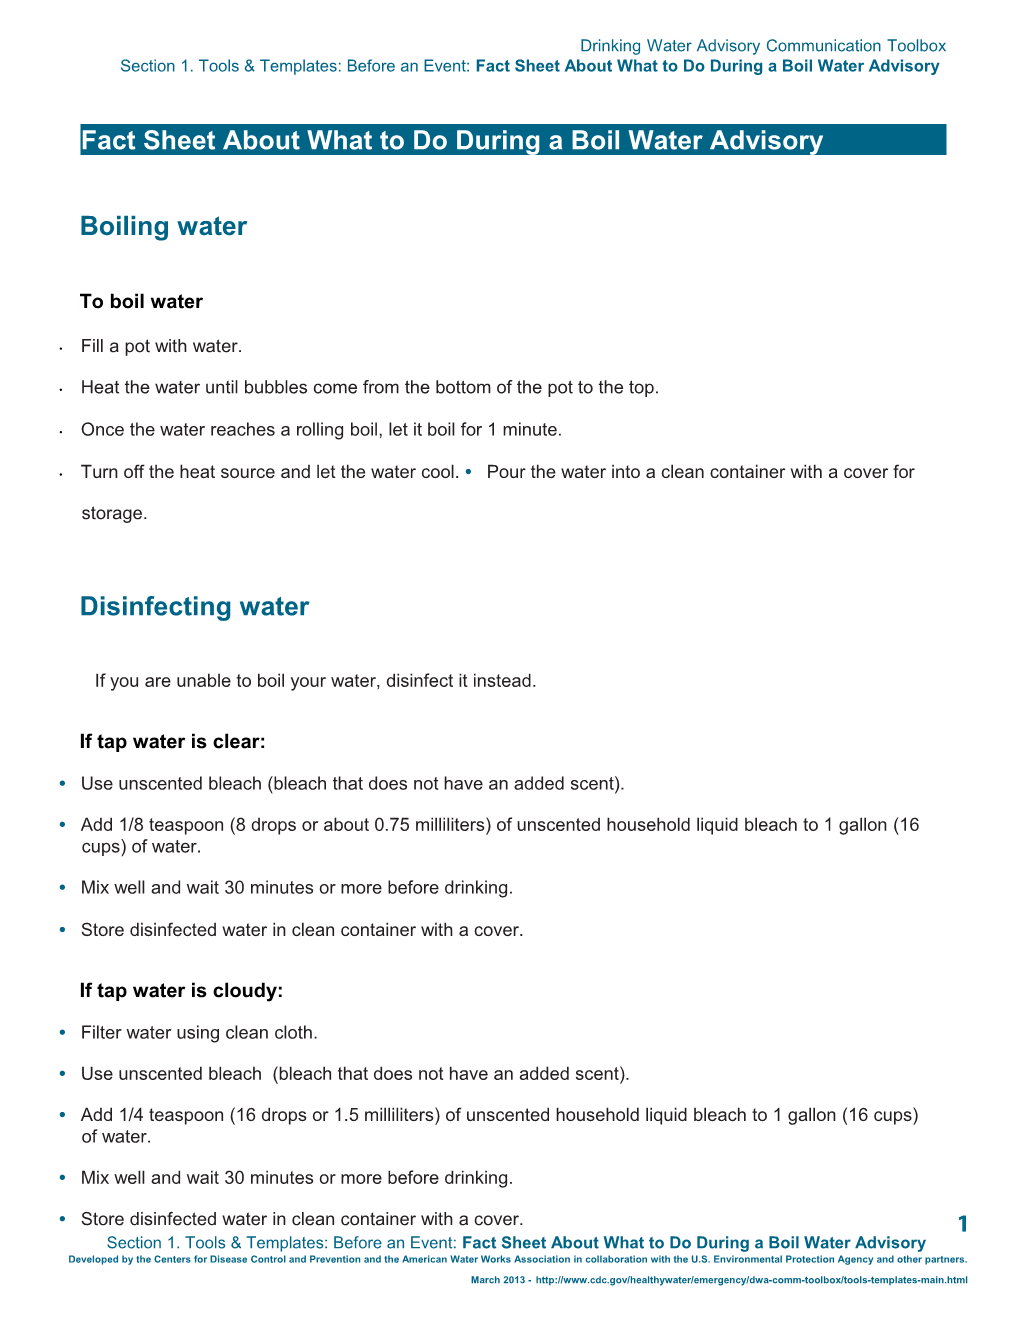 Fact Sheet About What to Do During a Boil Water Advisory